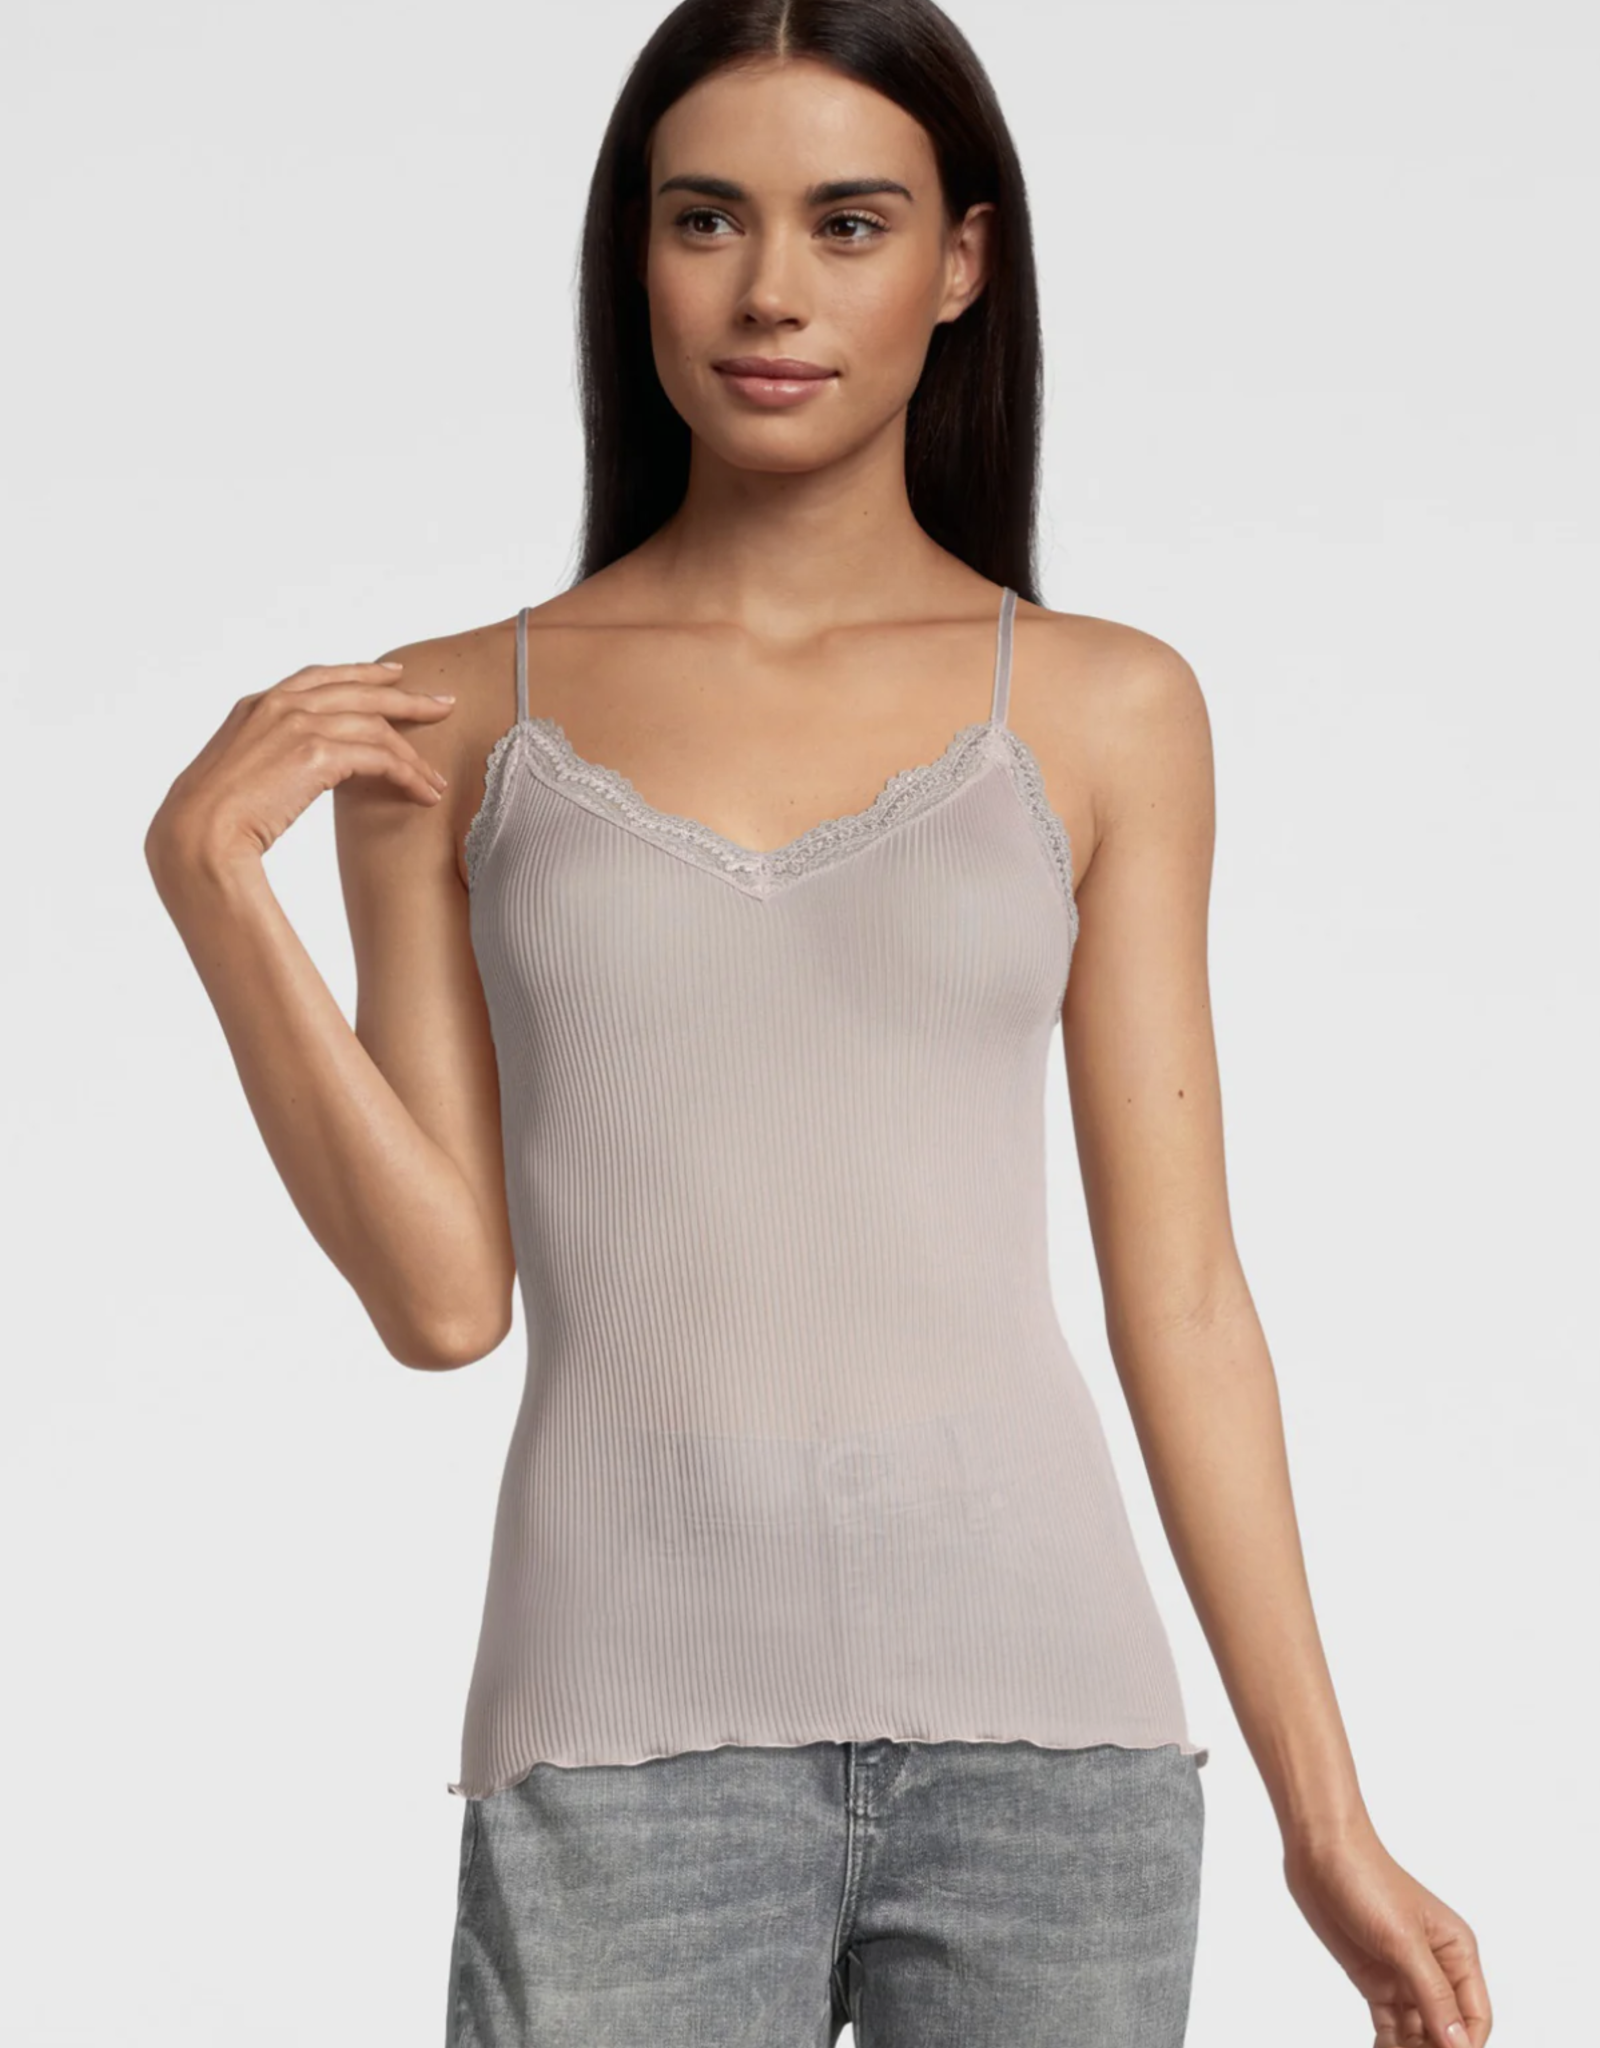 Click4She SIGNATURE Unlined Lace Camisole Lightweight Classic